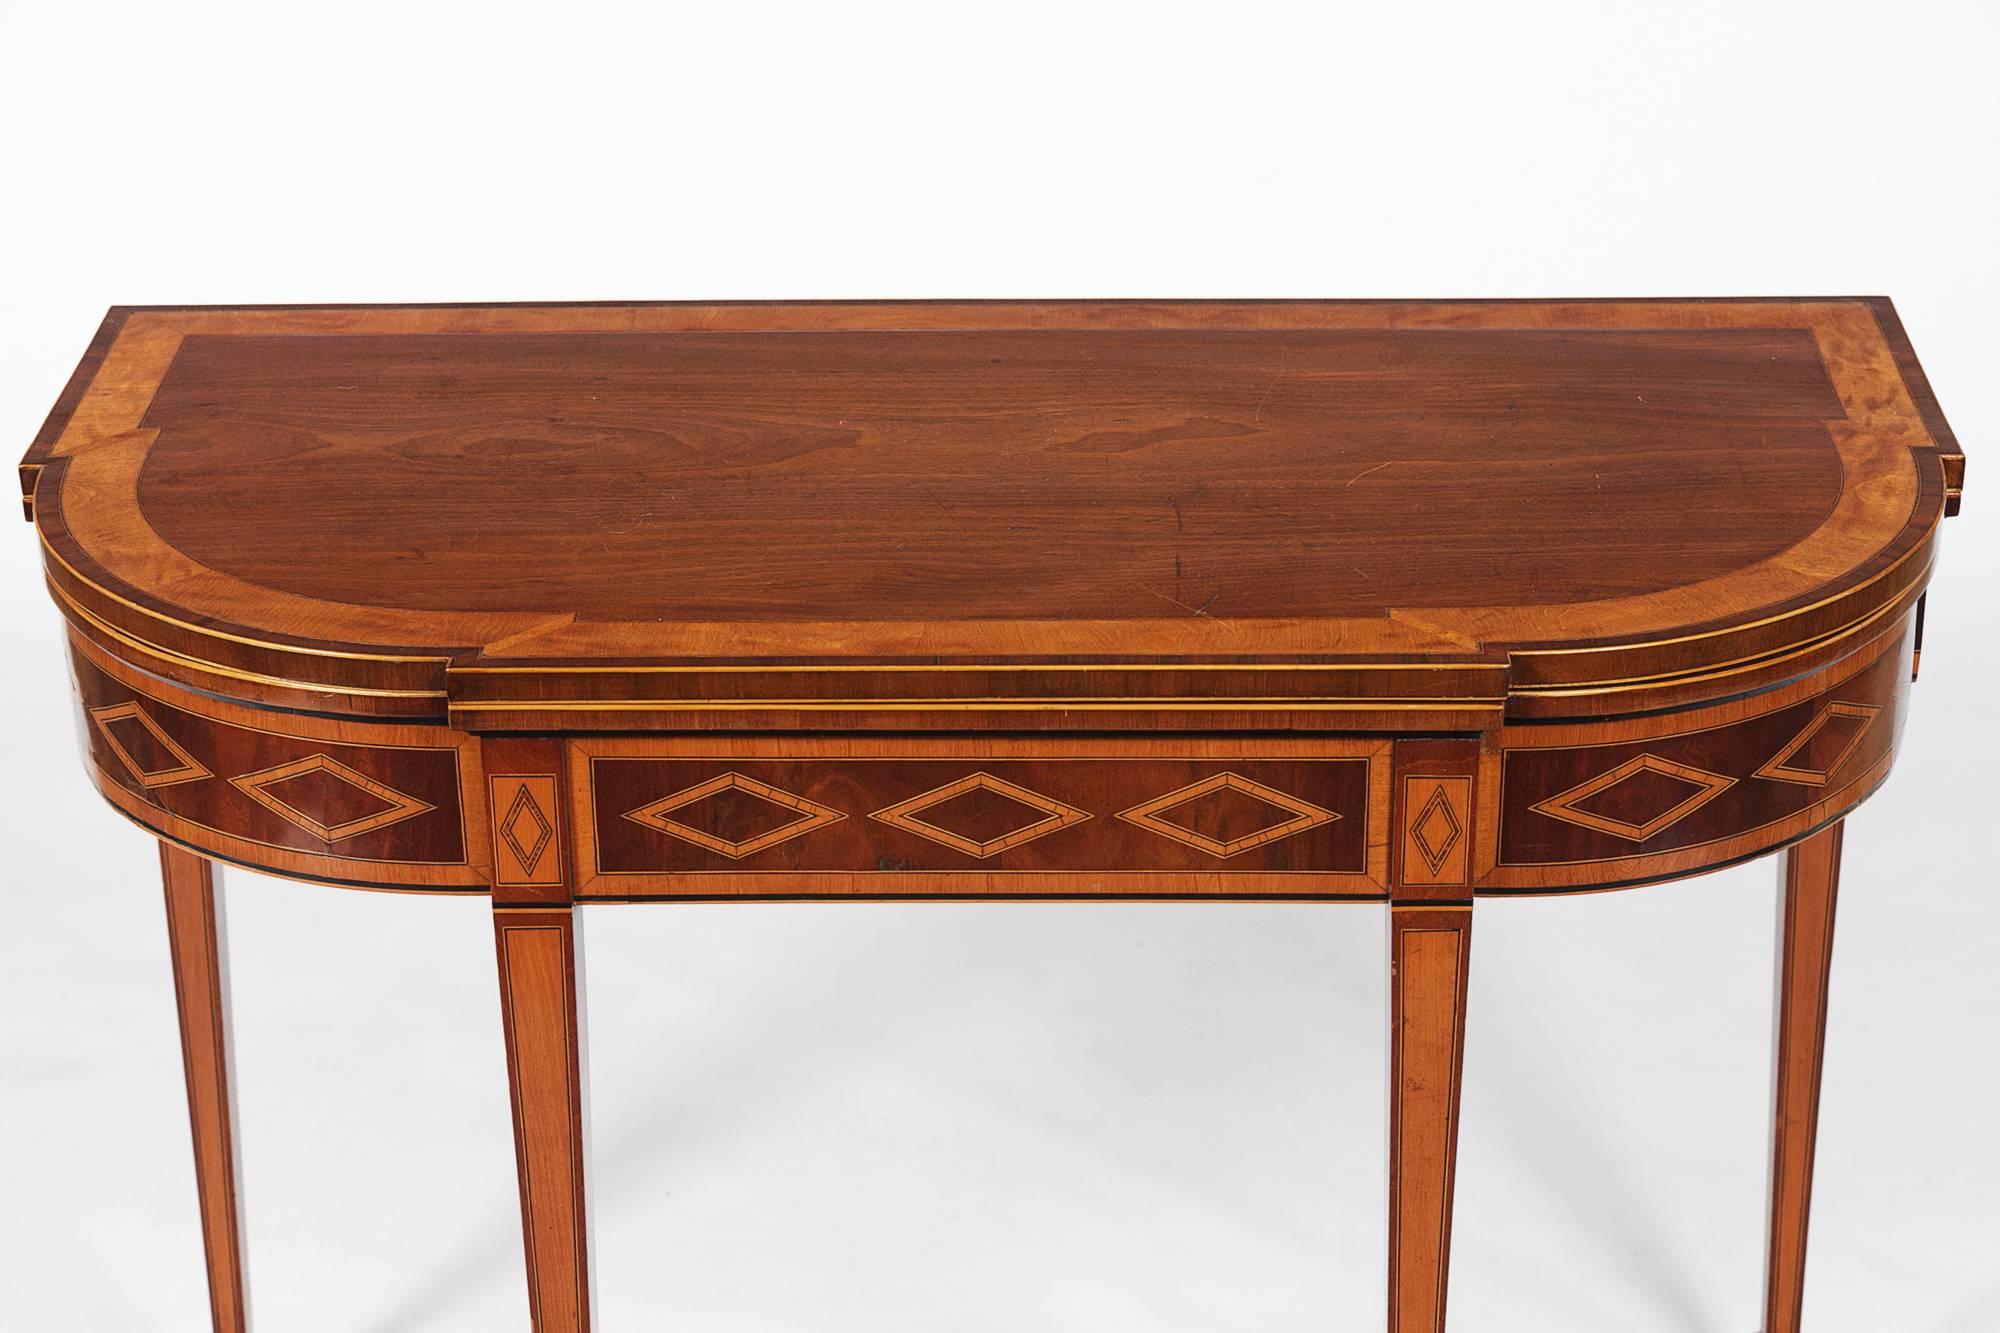 19th century mahogany breakfront D-shaped card table, the top and frieze with boxwood banding and ebony stringing. Raised on square tapering legs and spade feet.